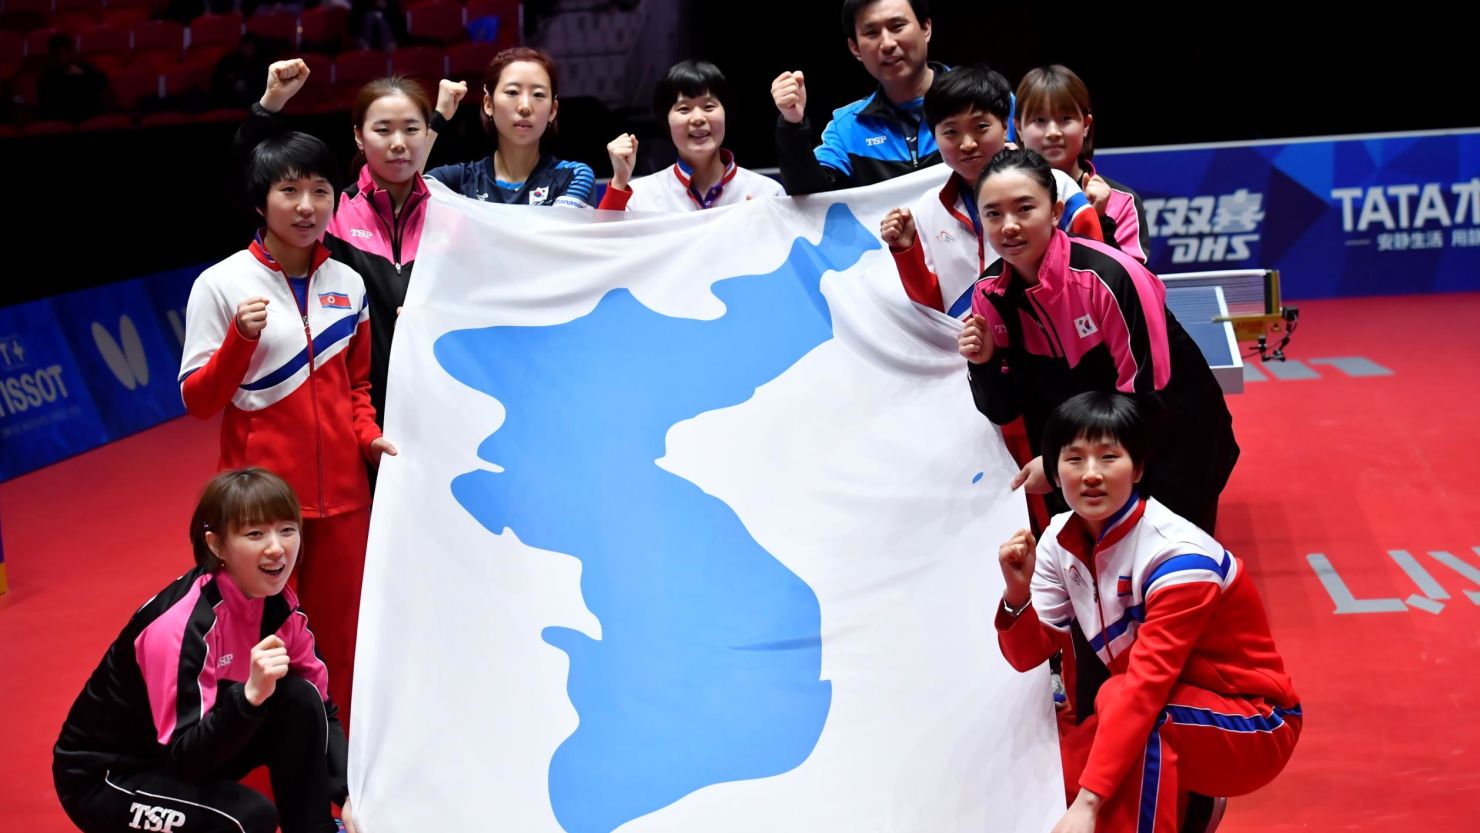 Staff members and players from both South Korea and North Korea pose with a flag.